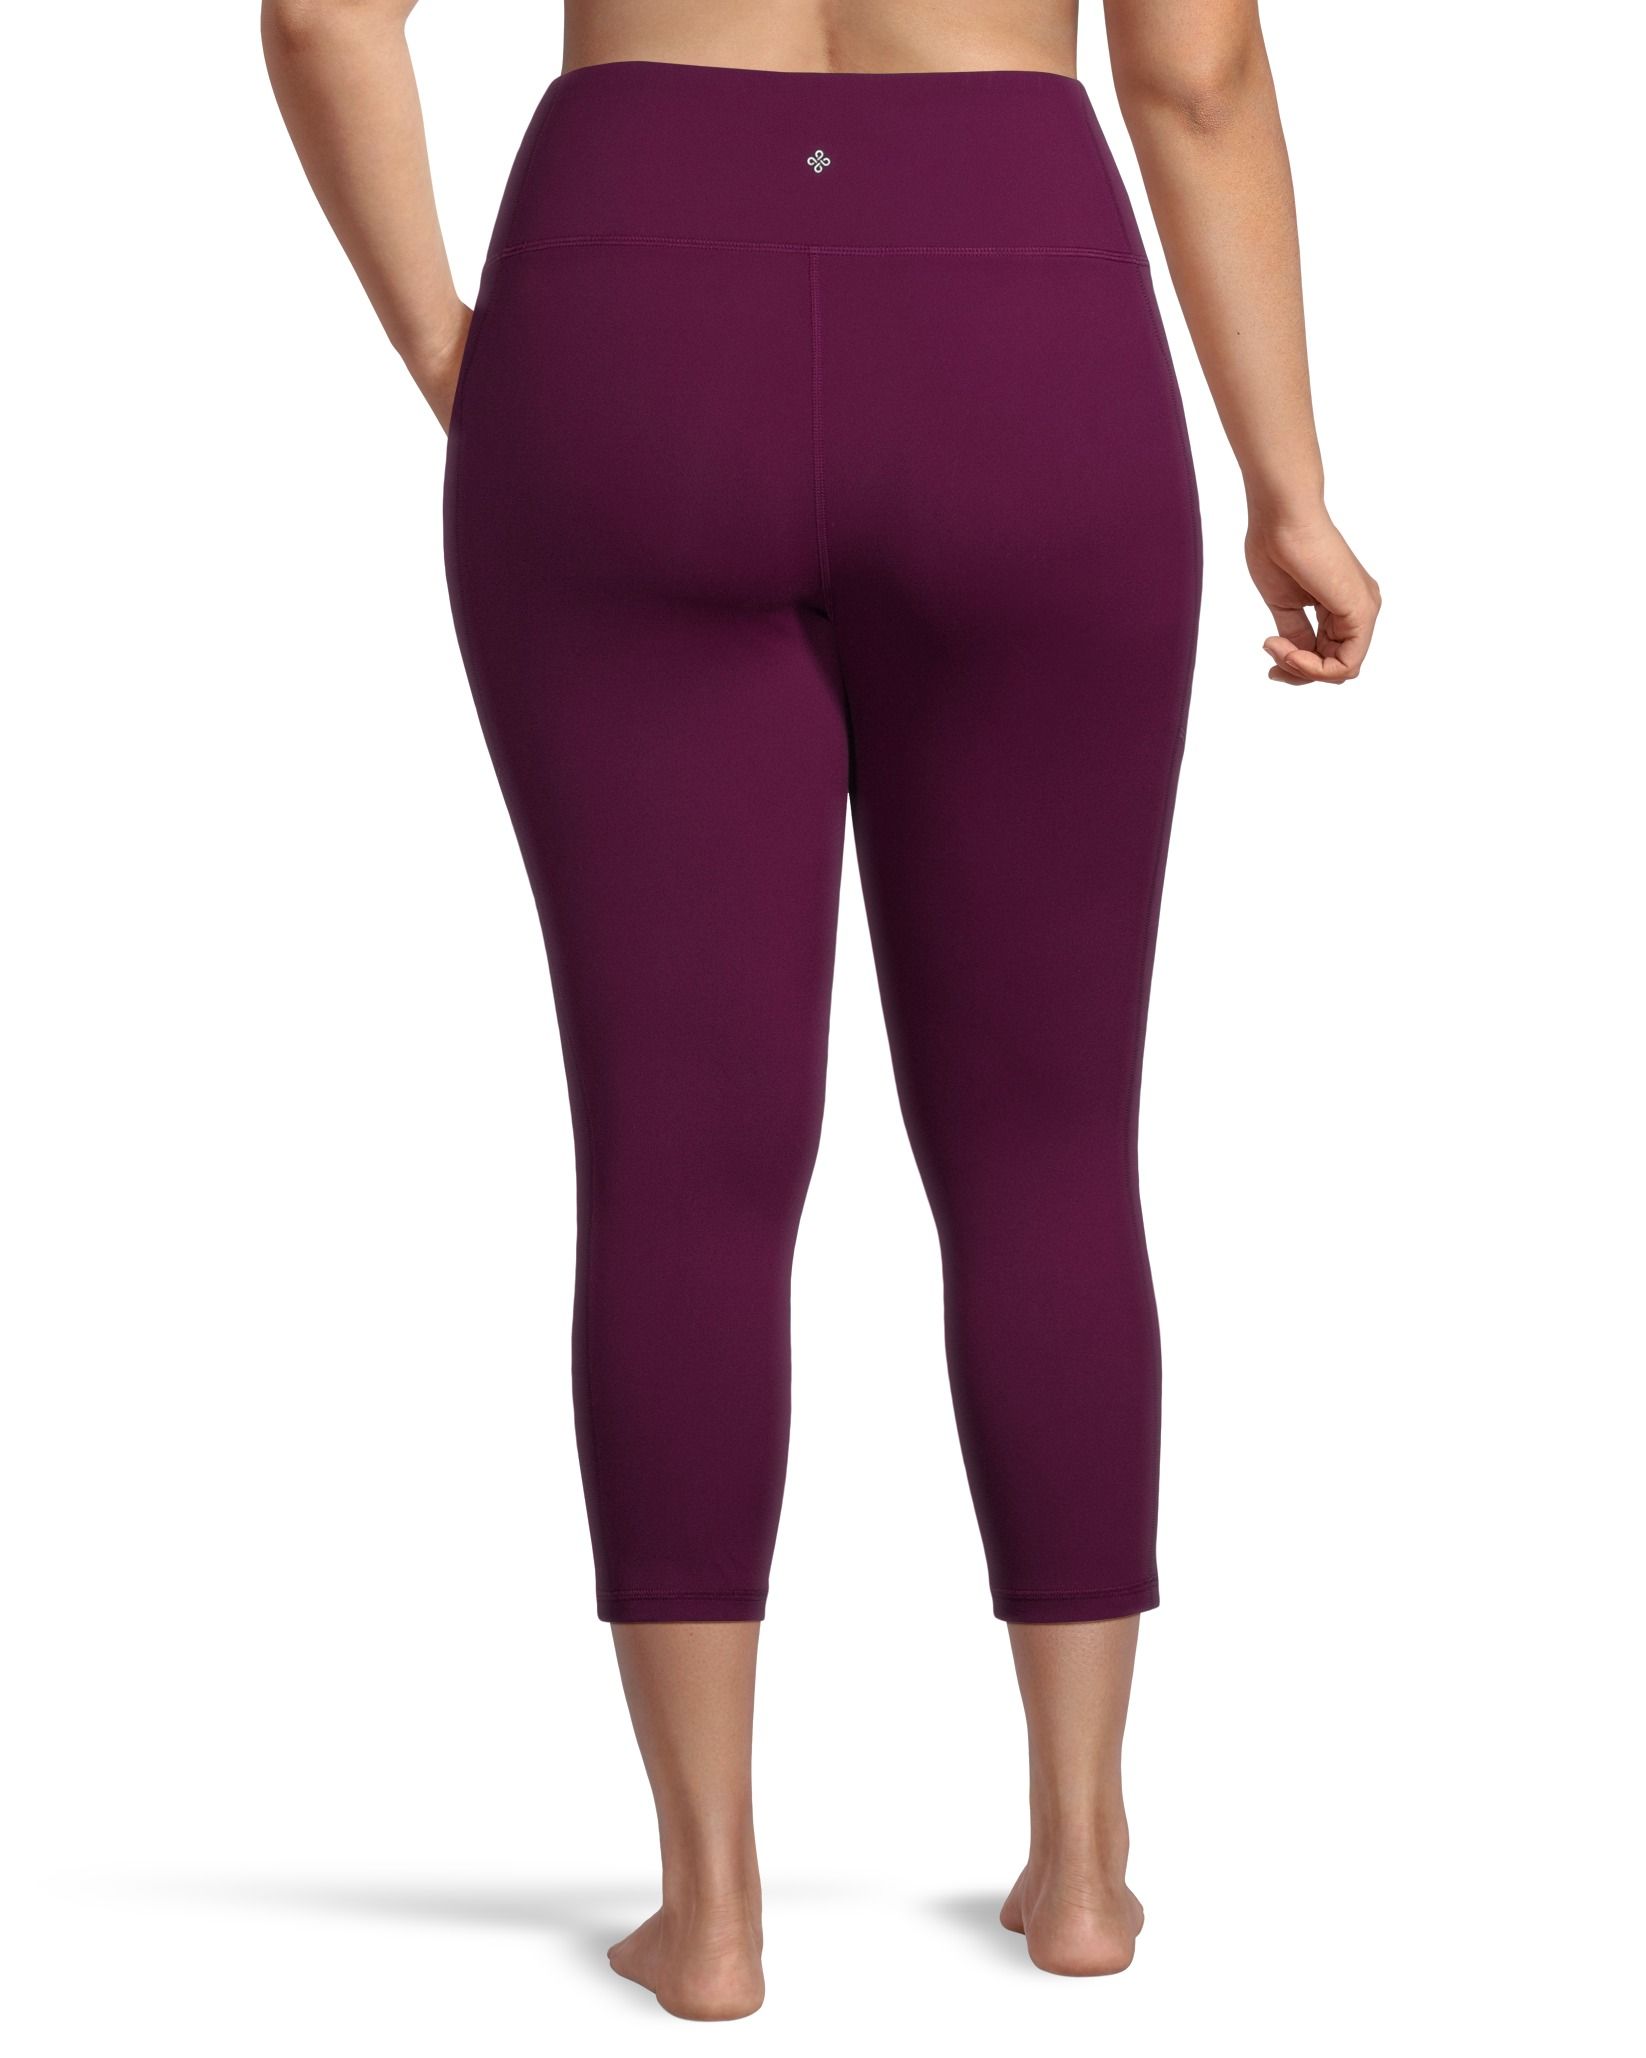 Shambhala Women's High Rise Live-In Warmth Brushed Leggings with